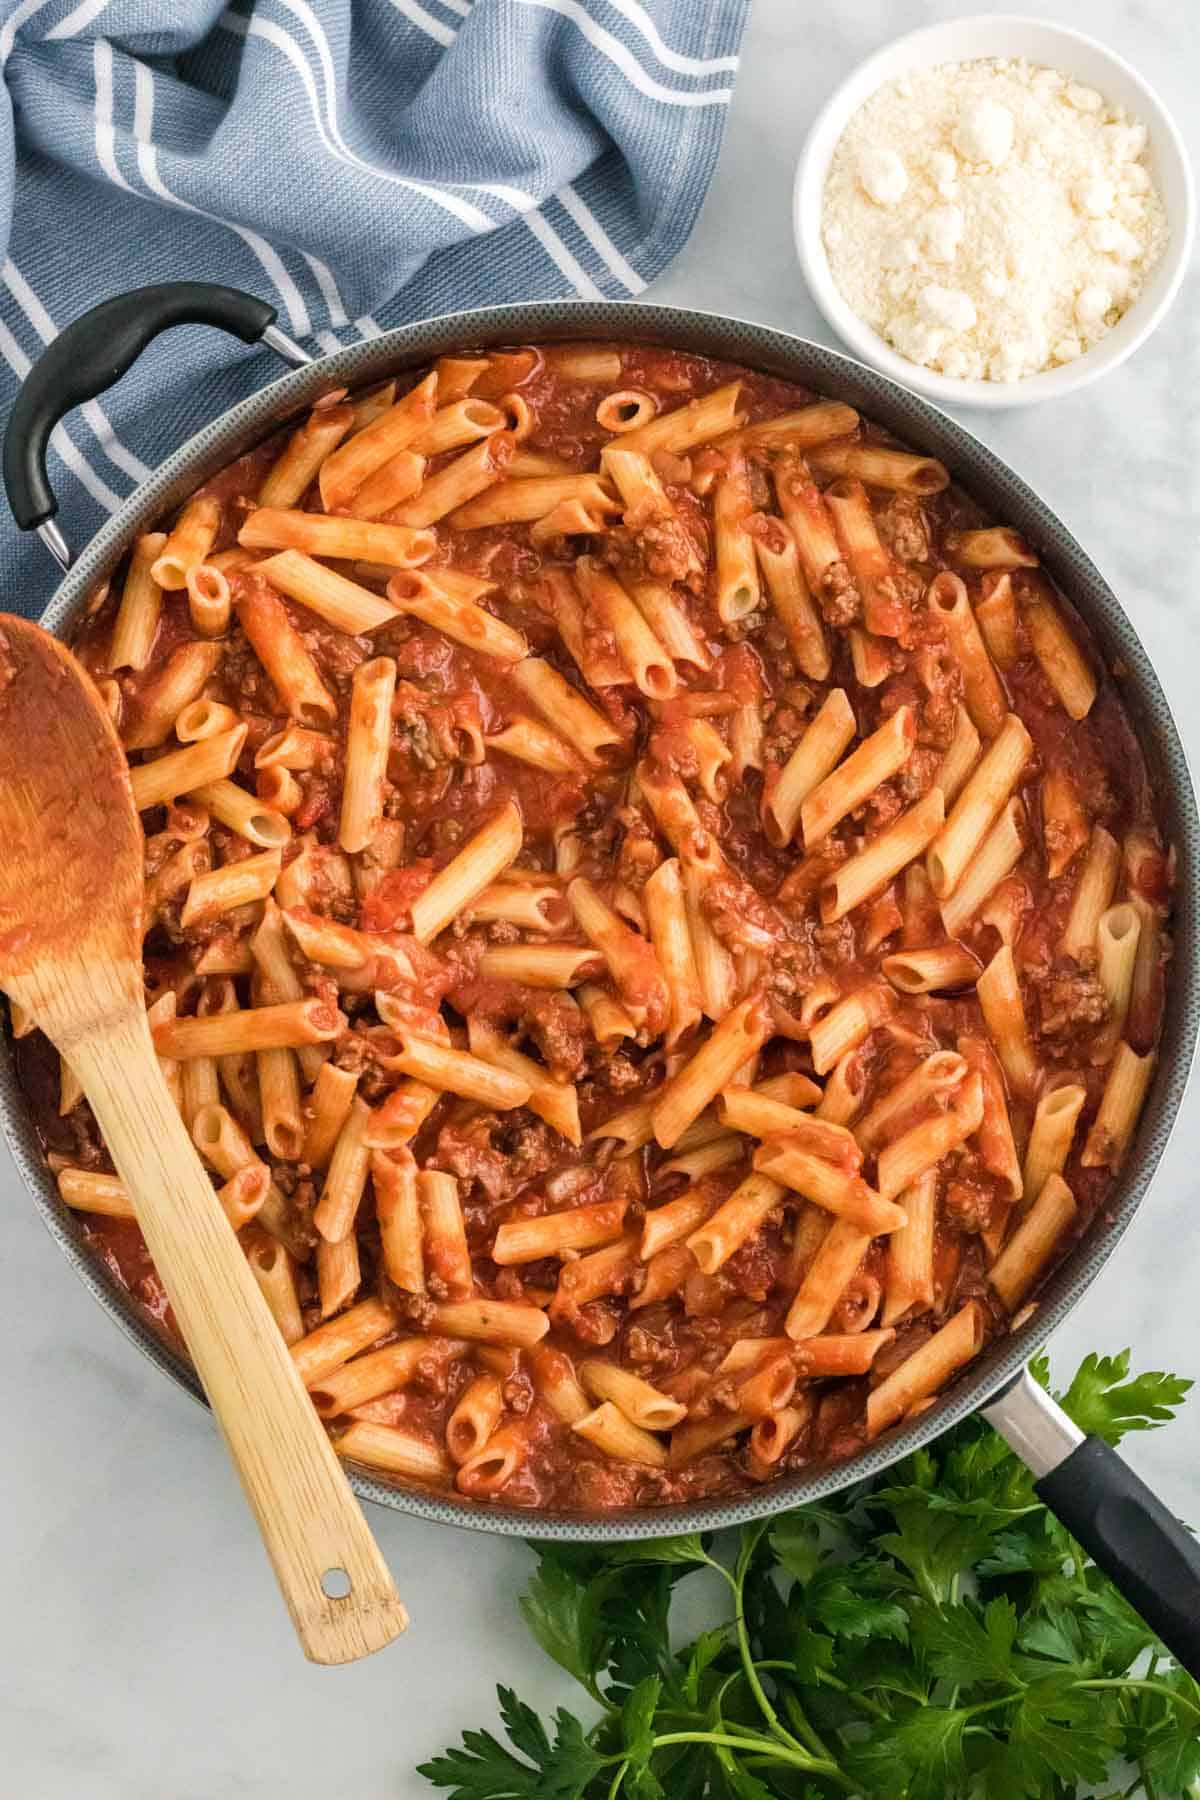 Ziti pasta added to meat sauce in a skillet.